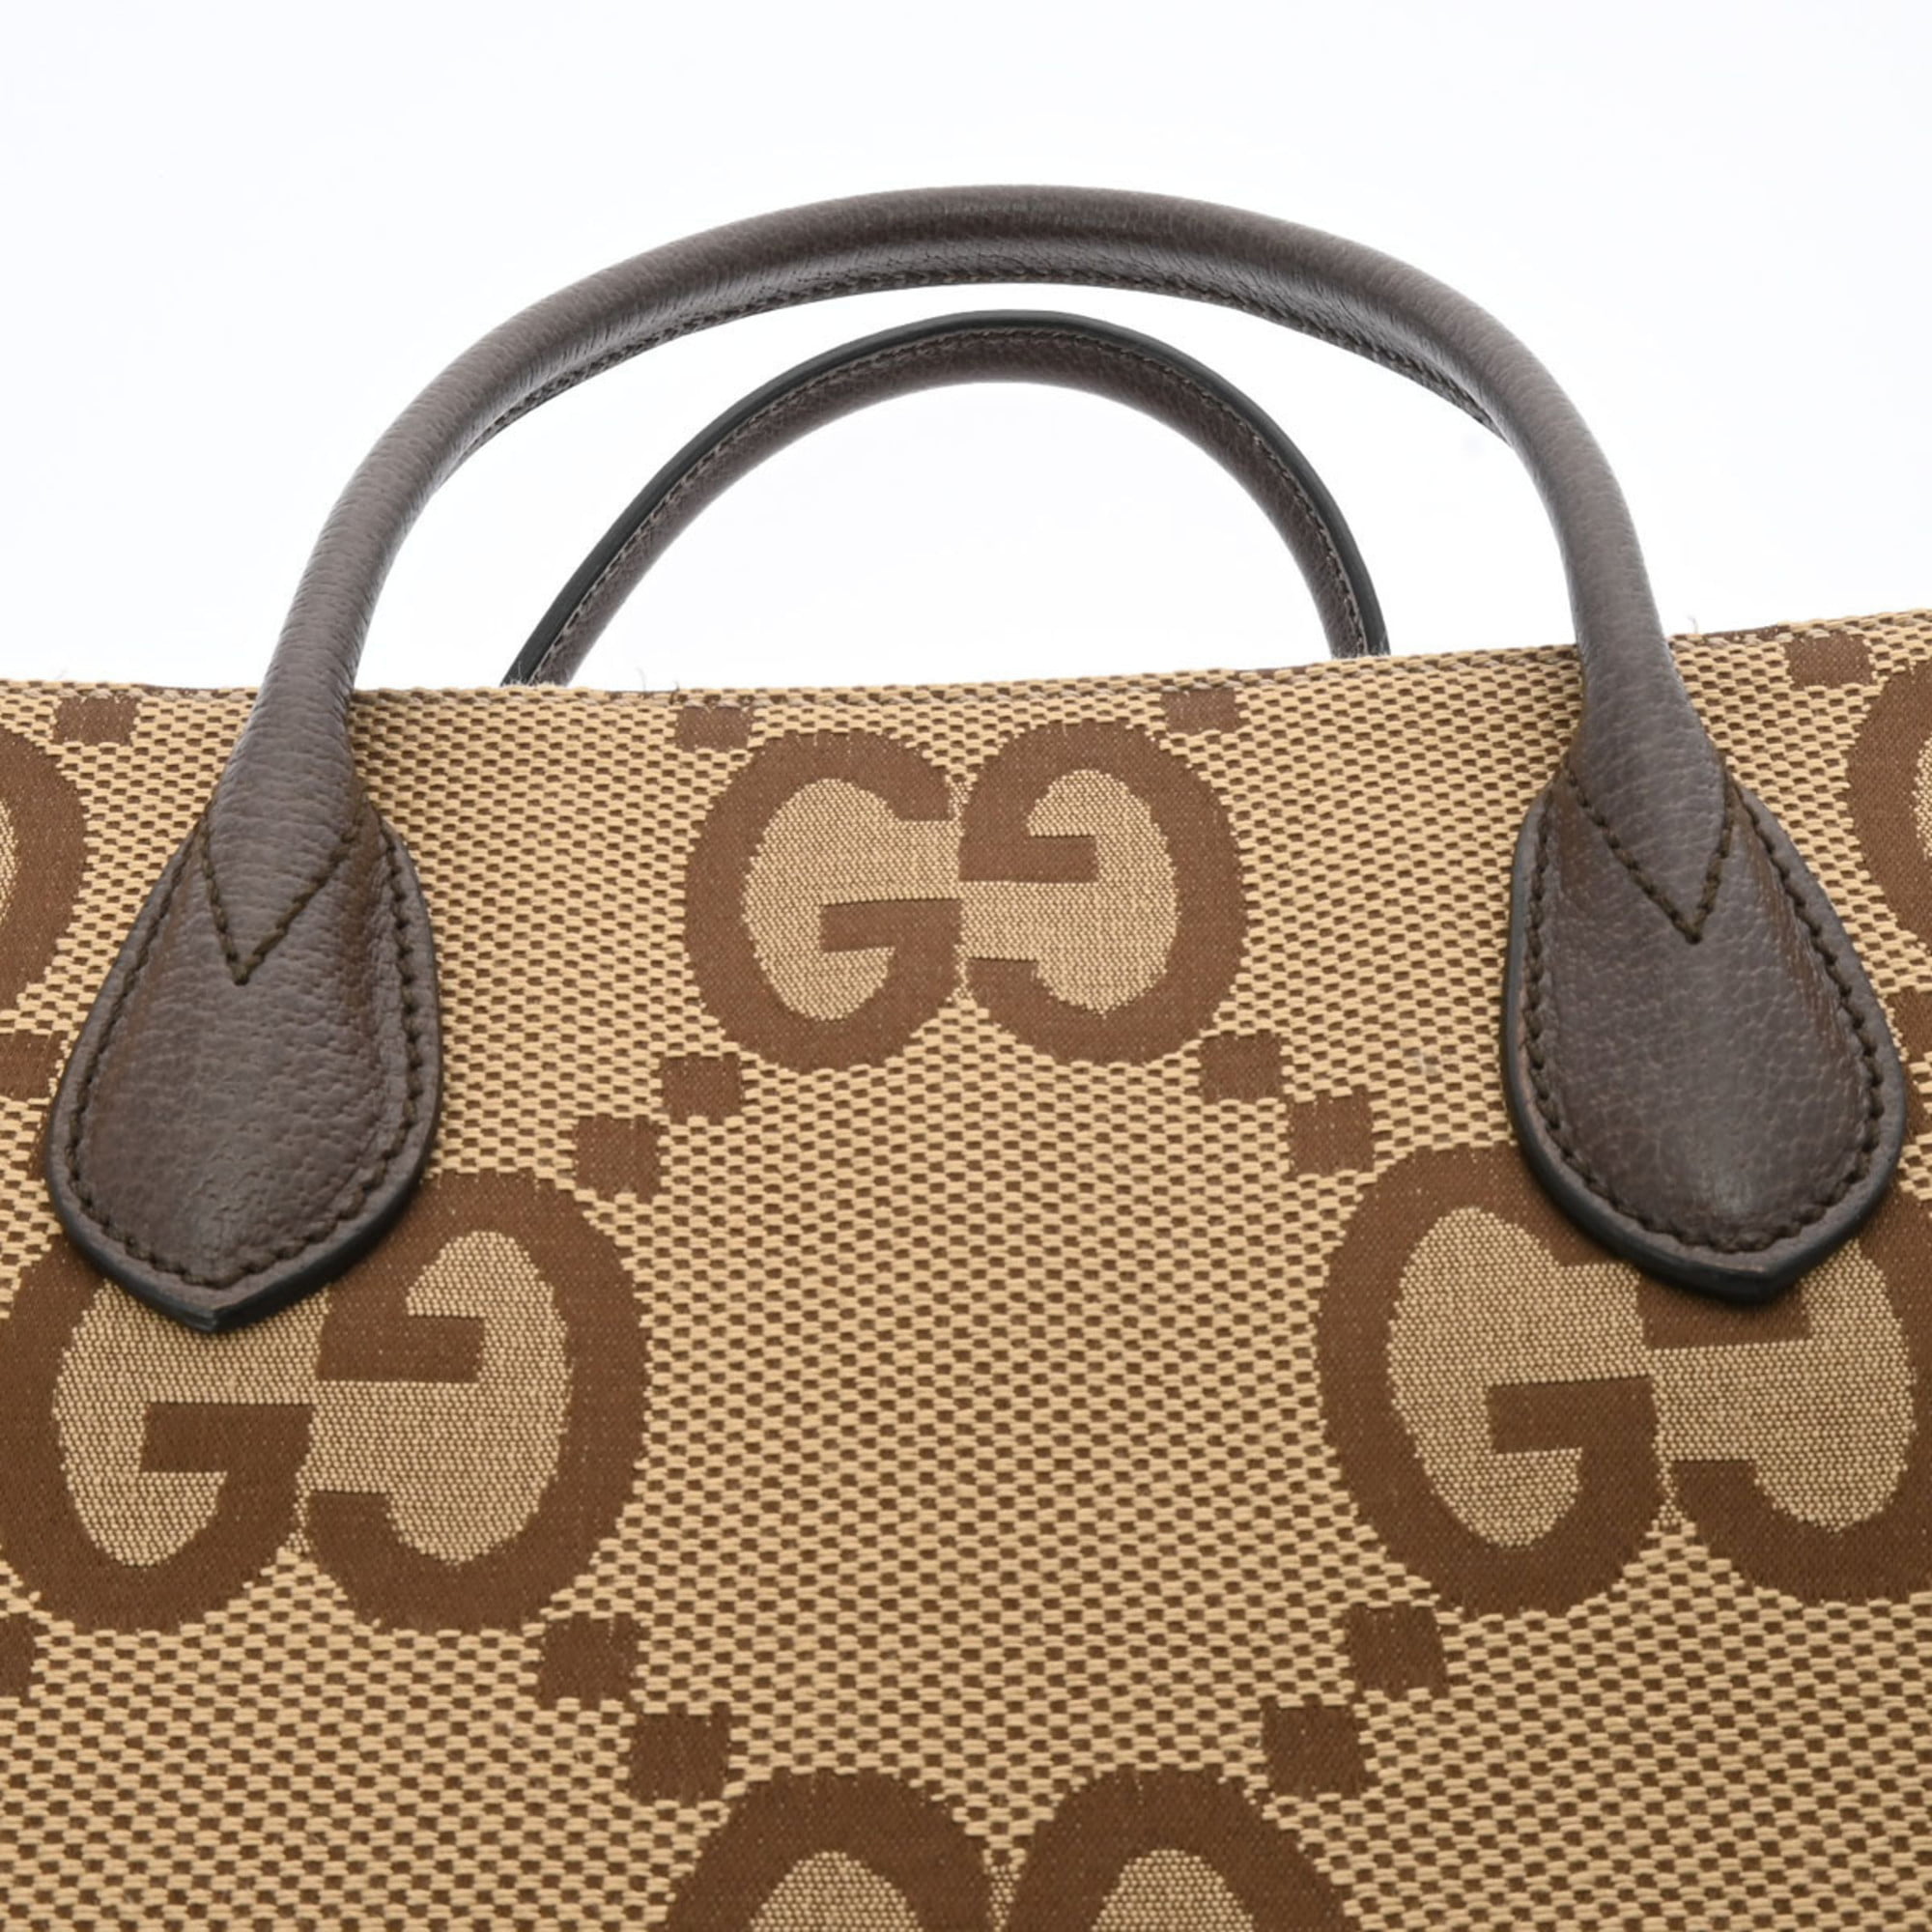 Authenticated Used GUCCI Gucci Jumbo GG Beige 678839 Unisex Canvas Tote Bag  